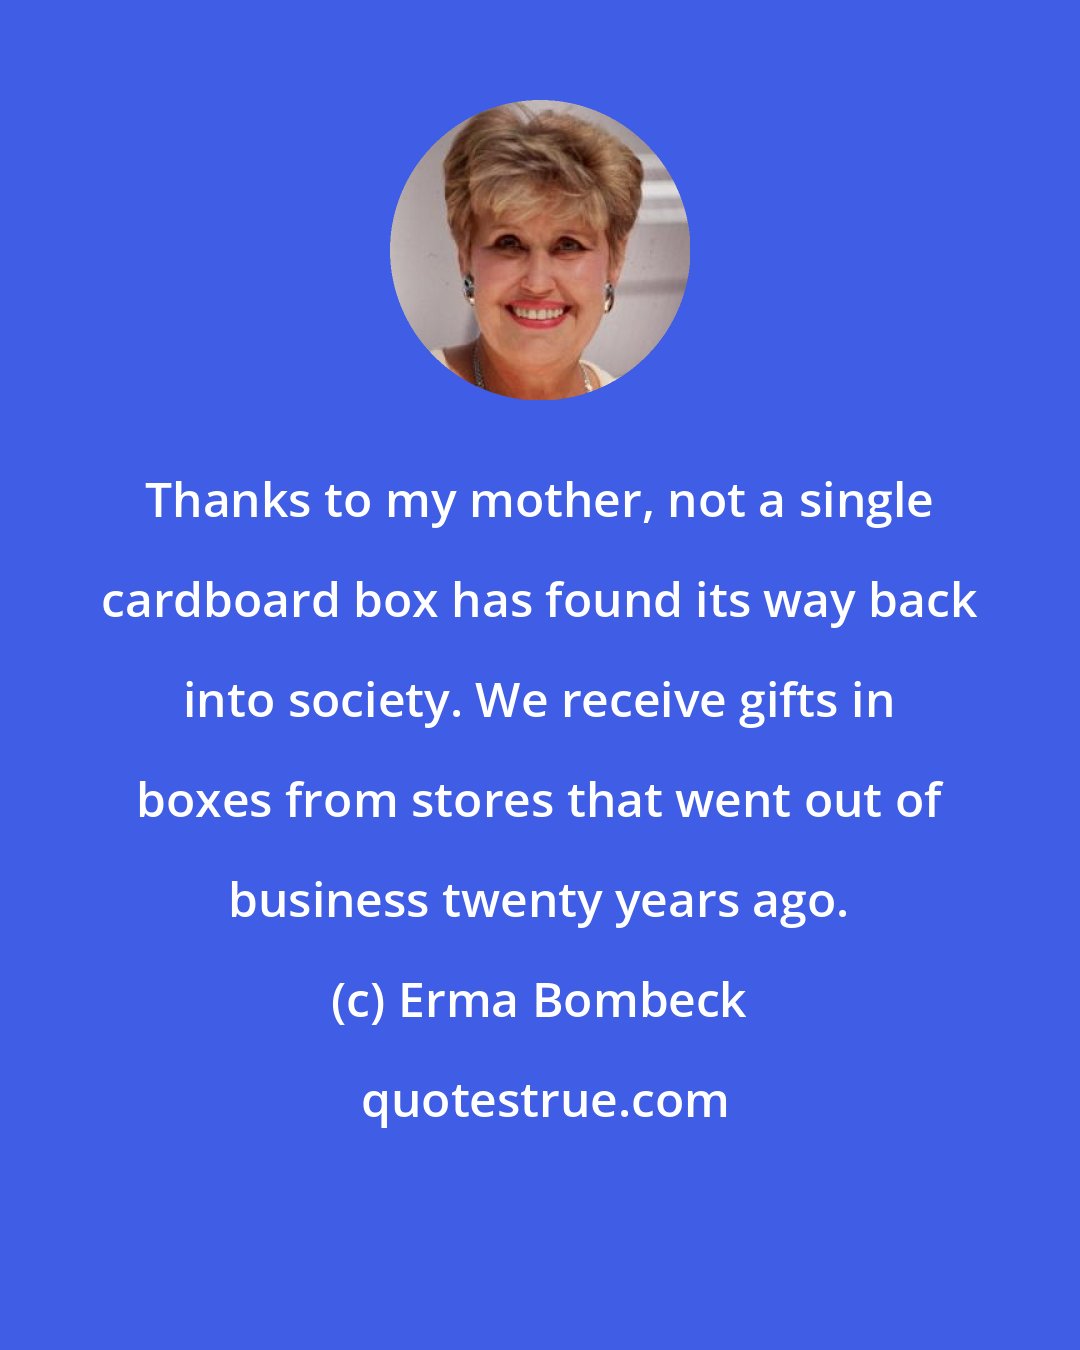 Erma Bombeck: Thanks to my mother, not a single cardboard box has found its way back into society. We receive gifts in boxes from stores that went out of business twenty years ago.